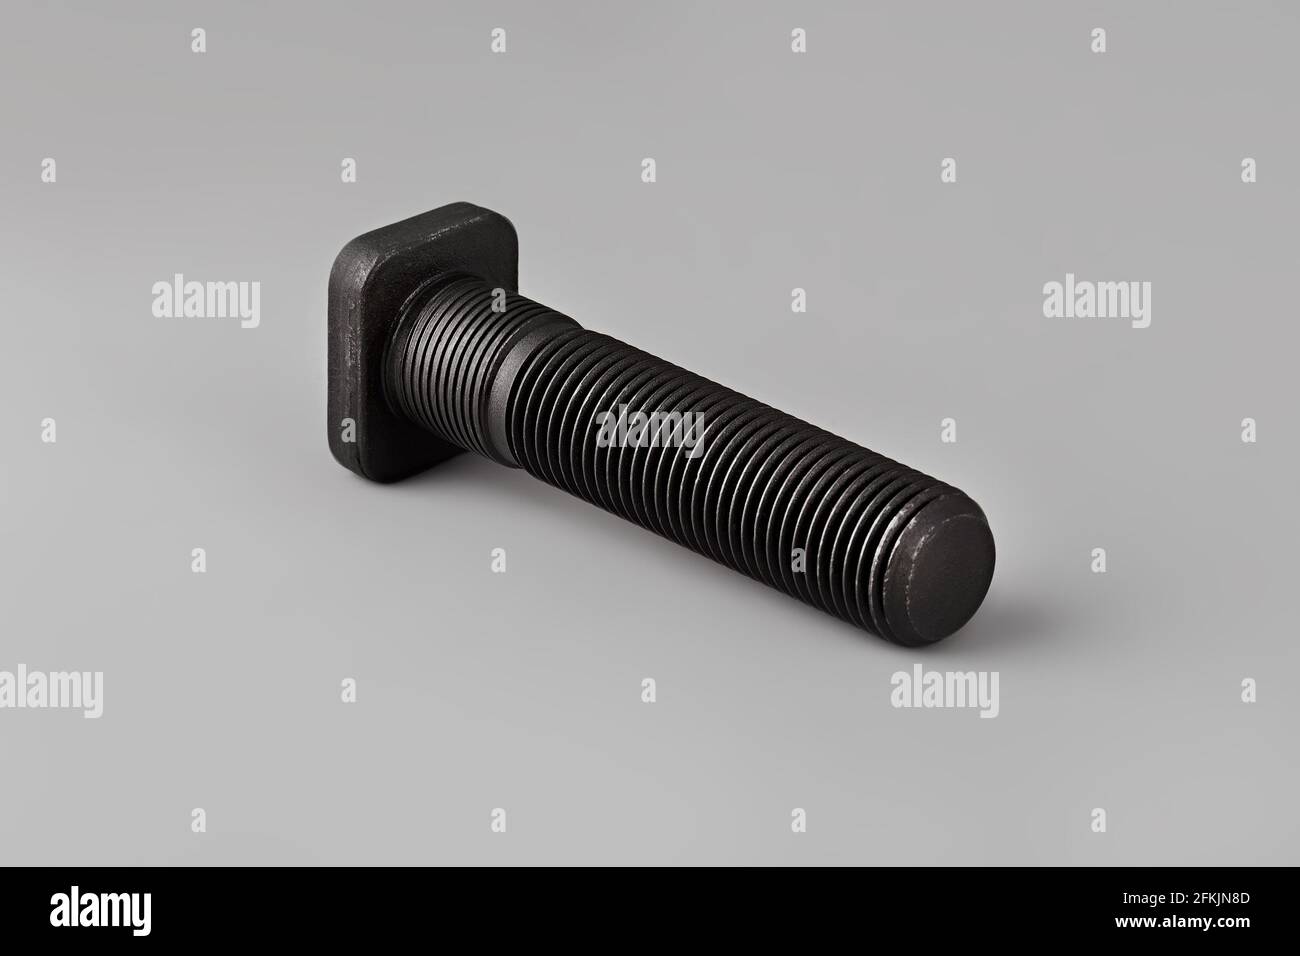 Wheel mounting bolt on a gray background. Battery terminal mounting bolt. Bolt. Car Bolt Stock Photo